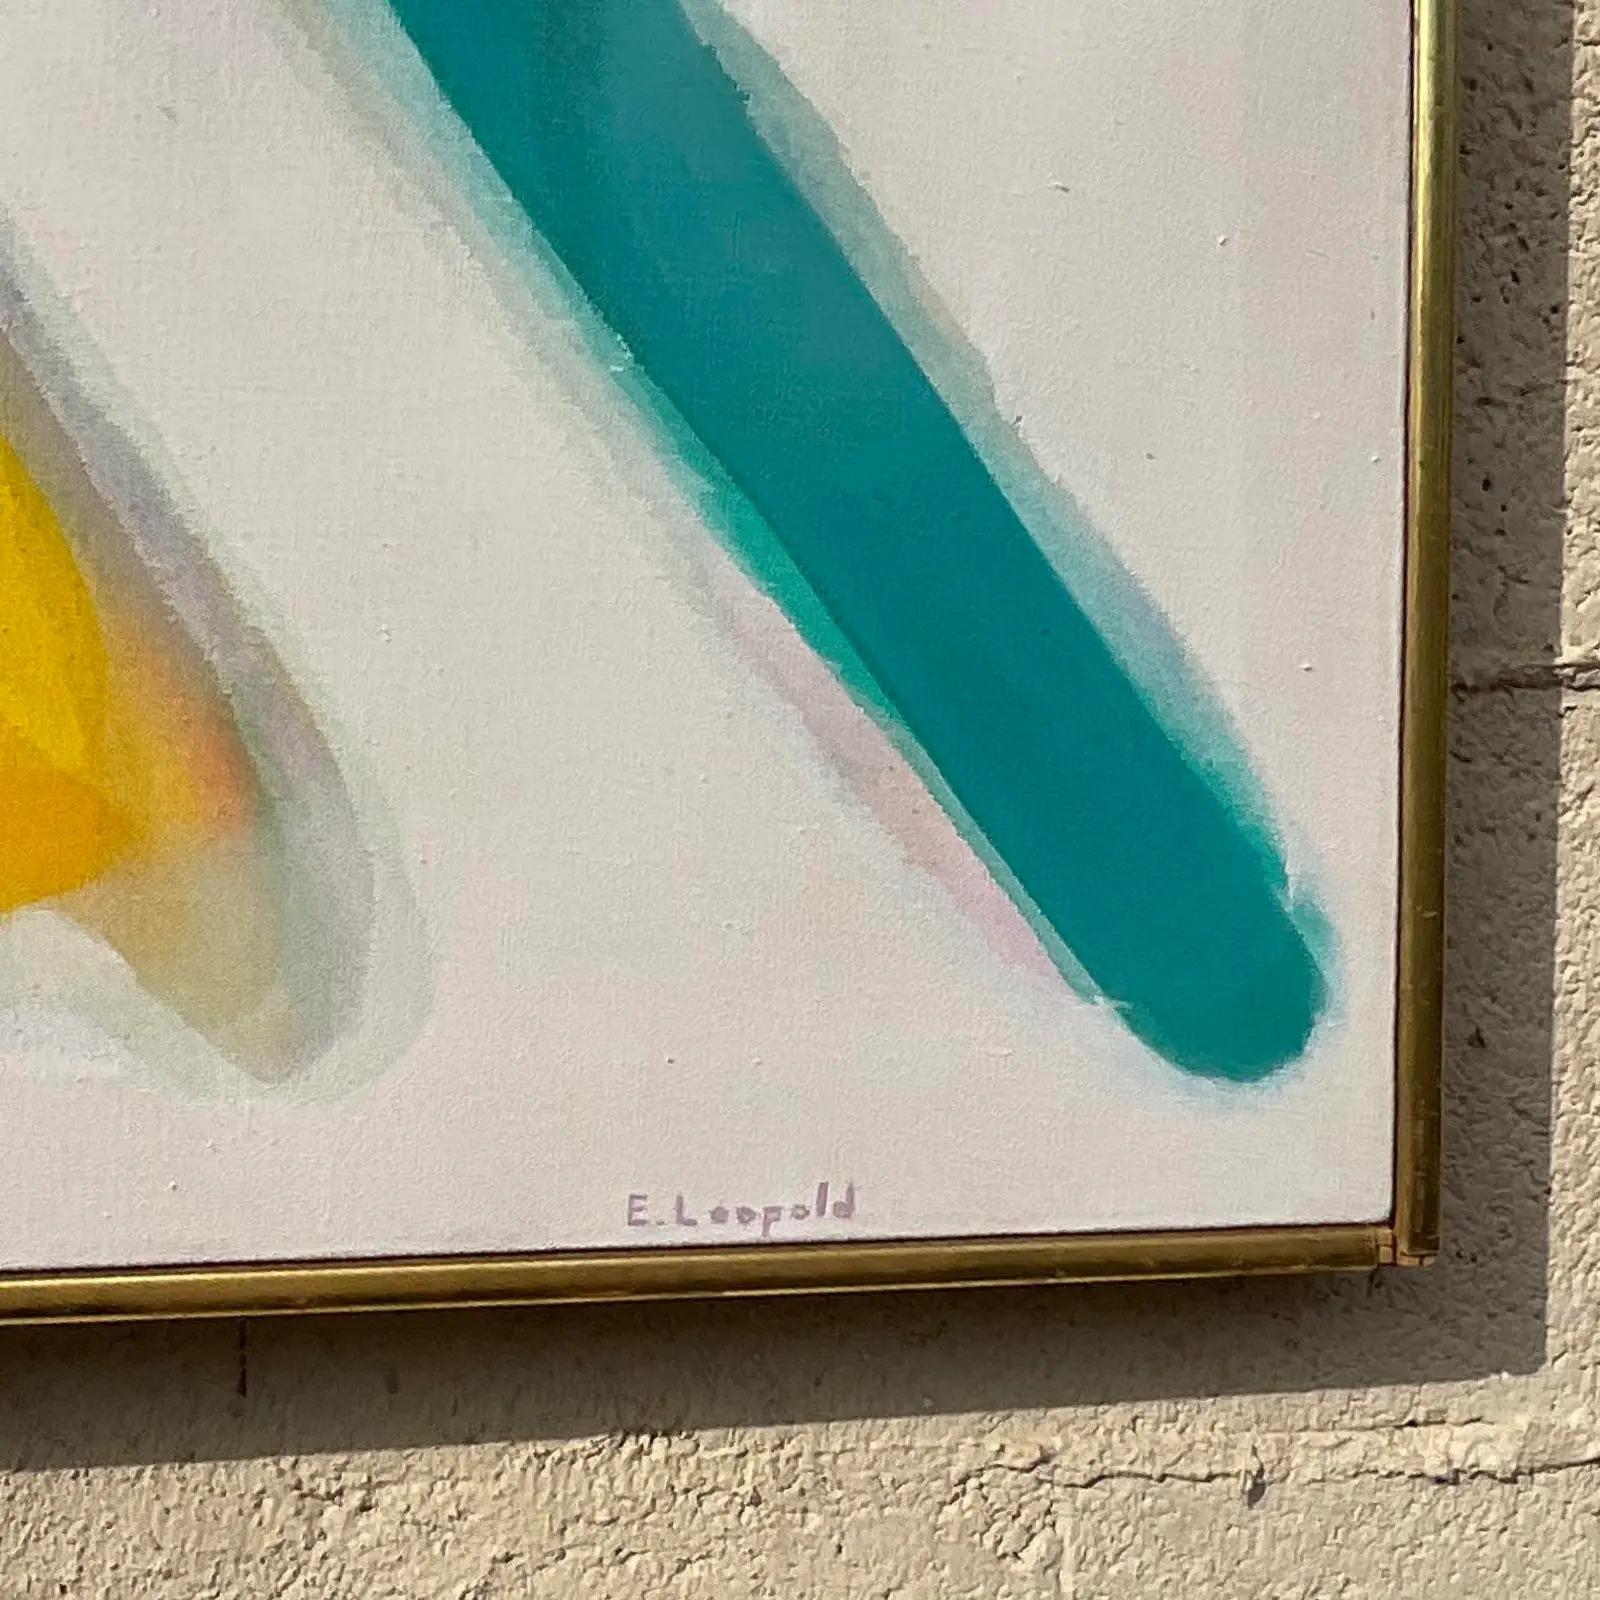 A fantastic vintage Boho original oil painting. A brilliant composition in bright clear colors. Signed by the artist Leopold. Acquired from a Palm Beach estate.